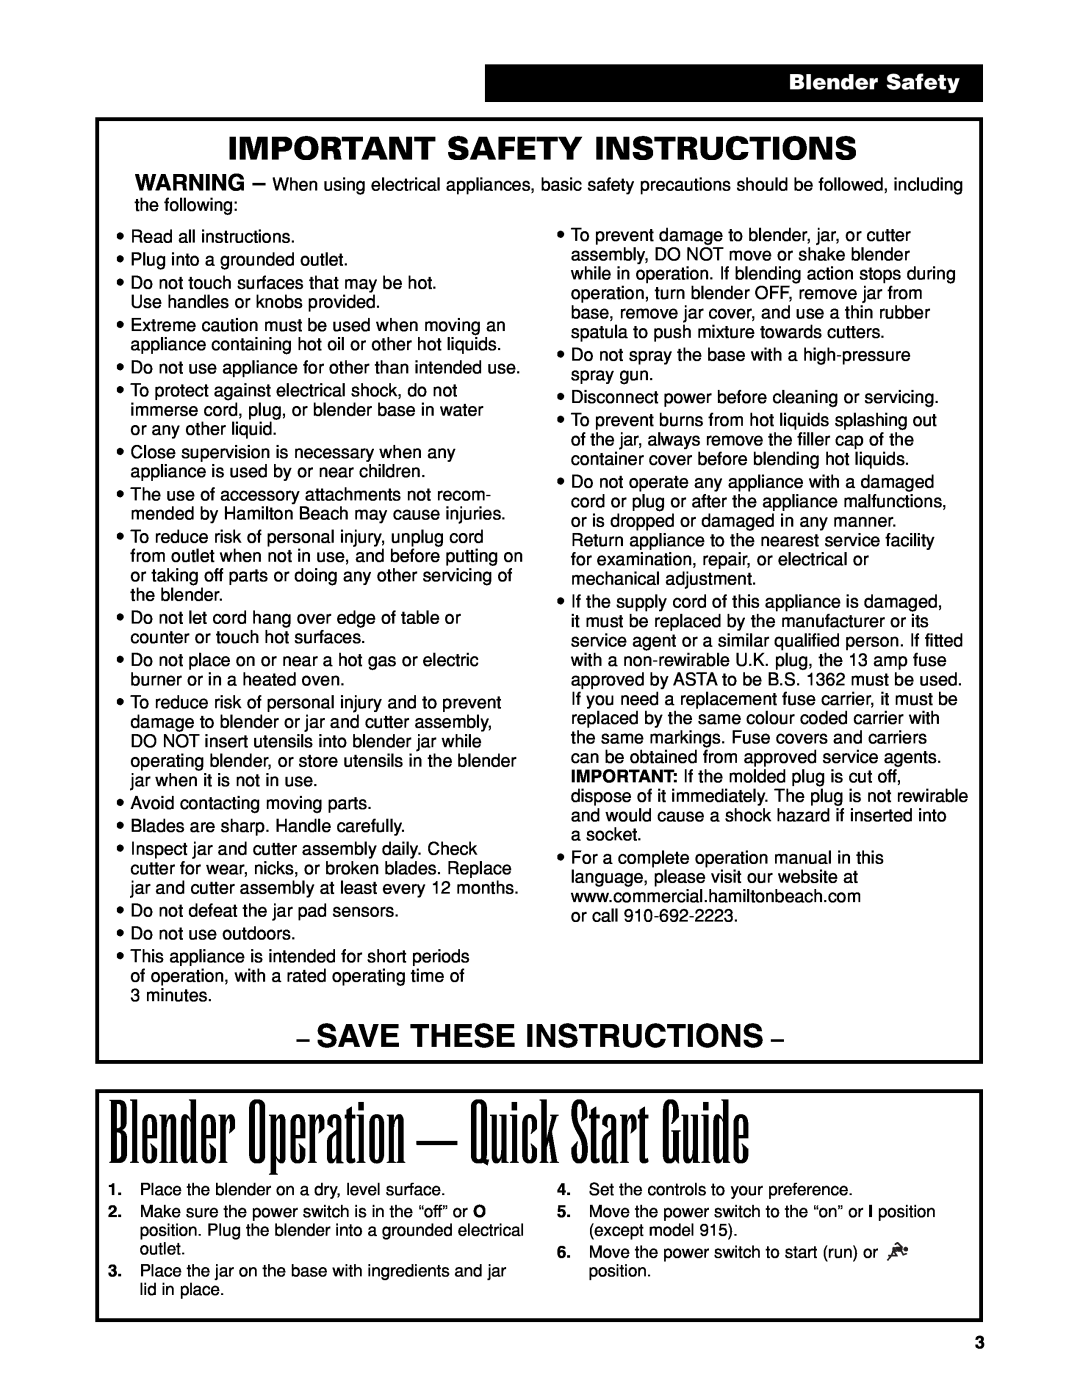 Hamilton Beach 840065601 Blender Operation - Quick Start Guide, Important Safety Instructions, Save These Instructions 